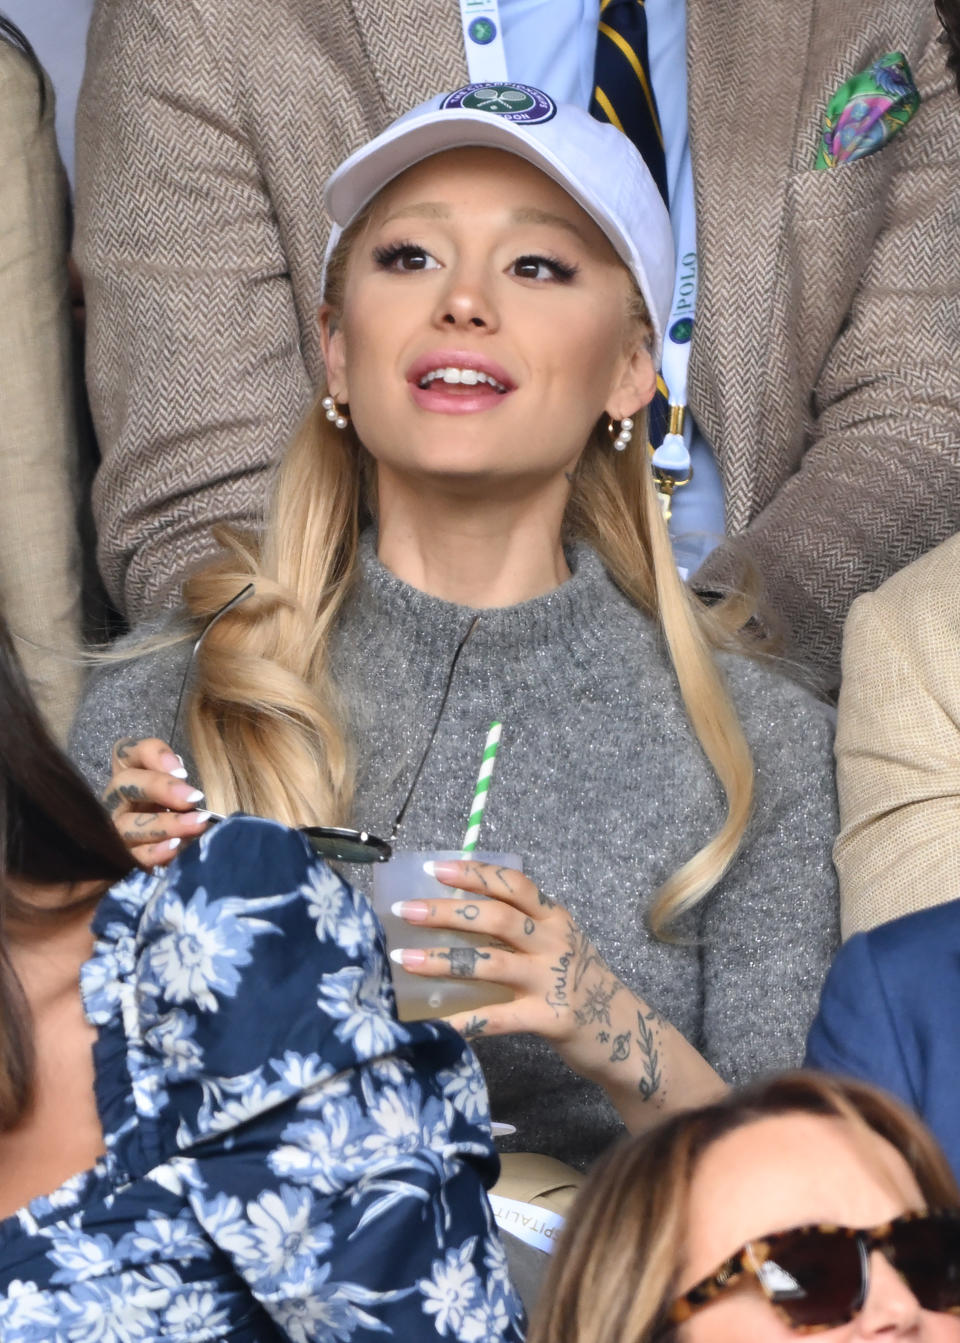 Ariana in a sweater and cap, holding a drink & watching a tennis match